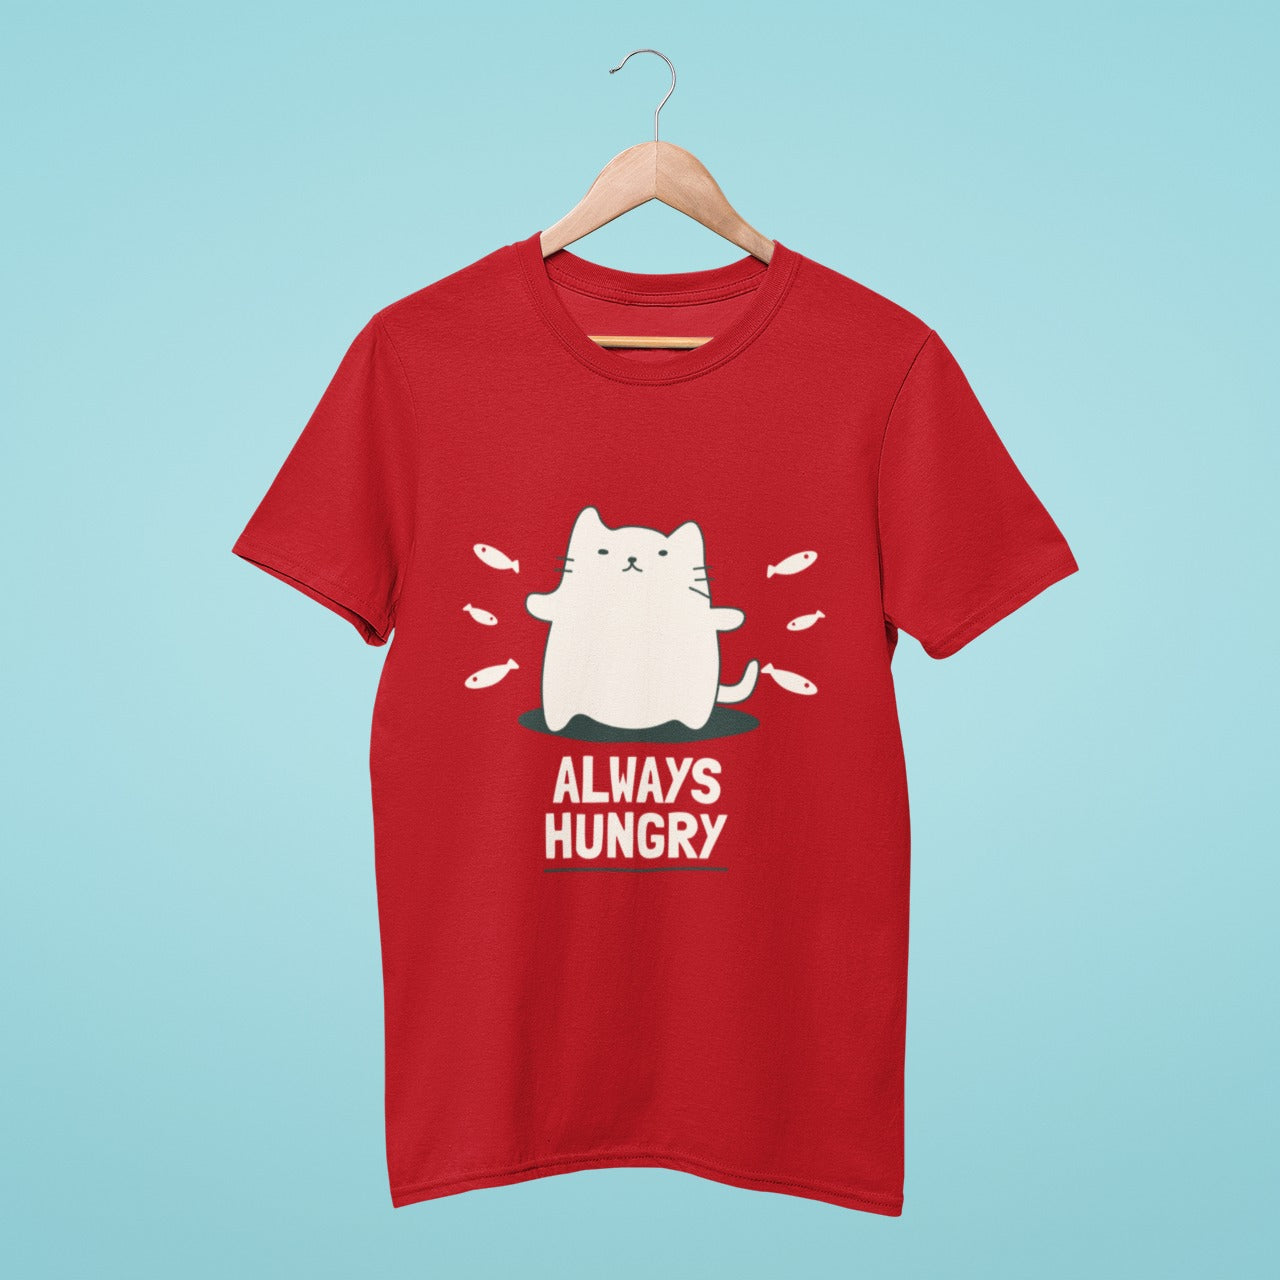 Satisfy your love for cats and food with our red t-shirt featuring a chubby cat surrounded by fish and the fun slogan "Always hungry". Made from high-quality materials, this comfortable and durable tee is perfect for everyday wear. Don't miss out on adding this adorable and relatable shirt to your collection!